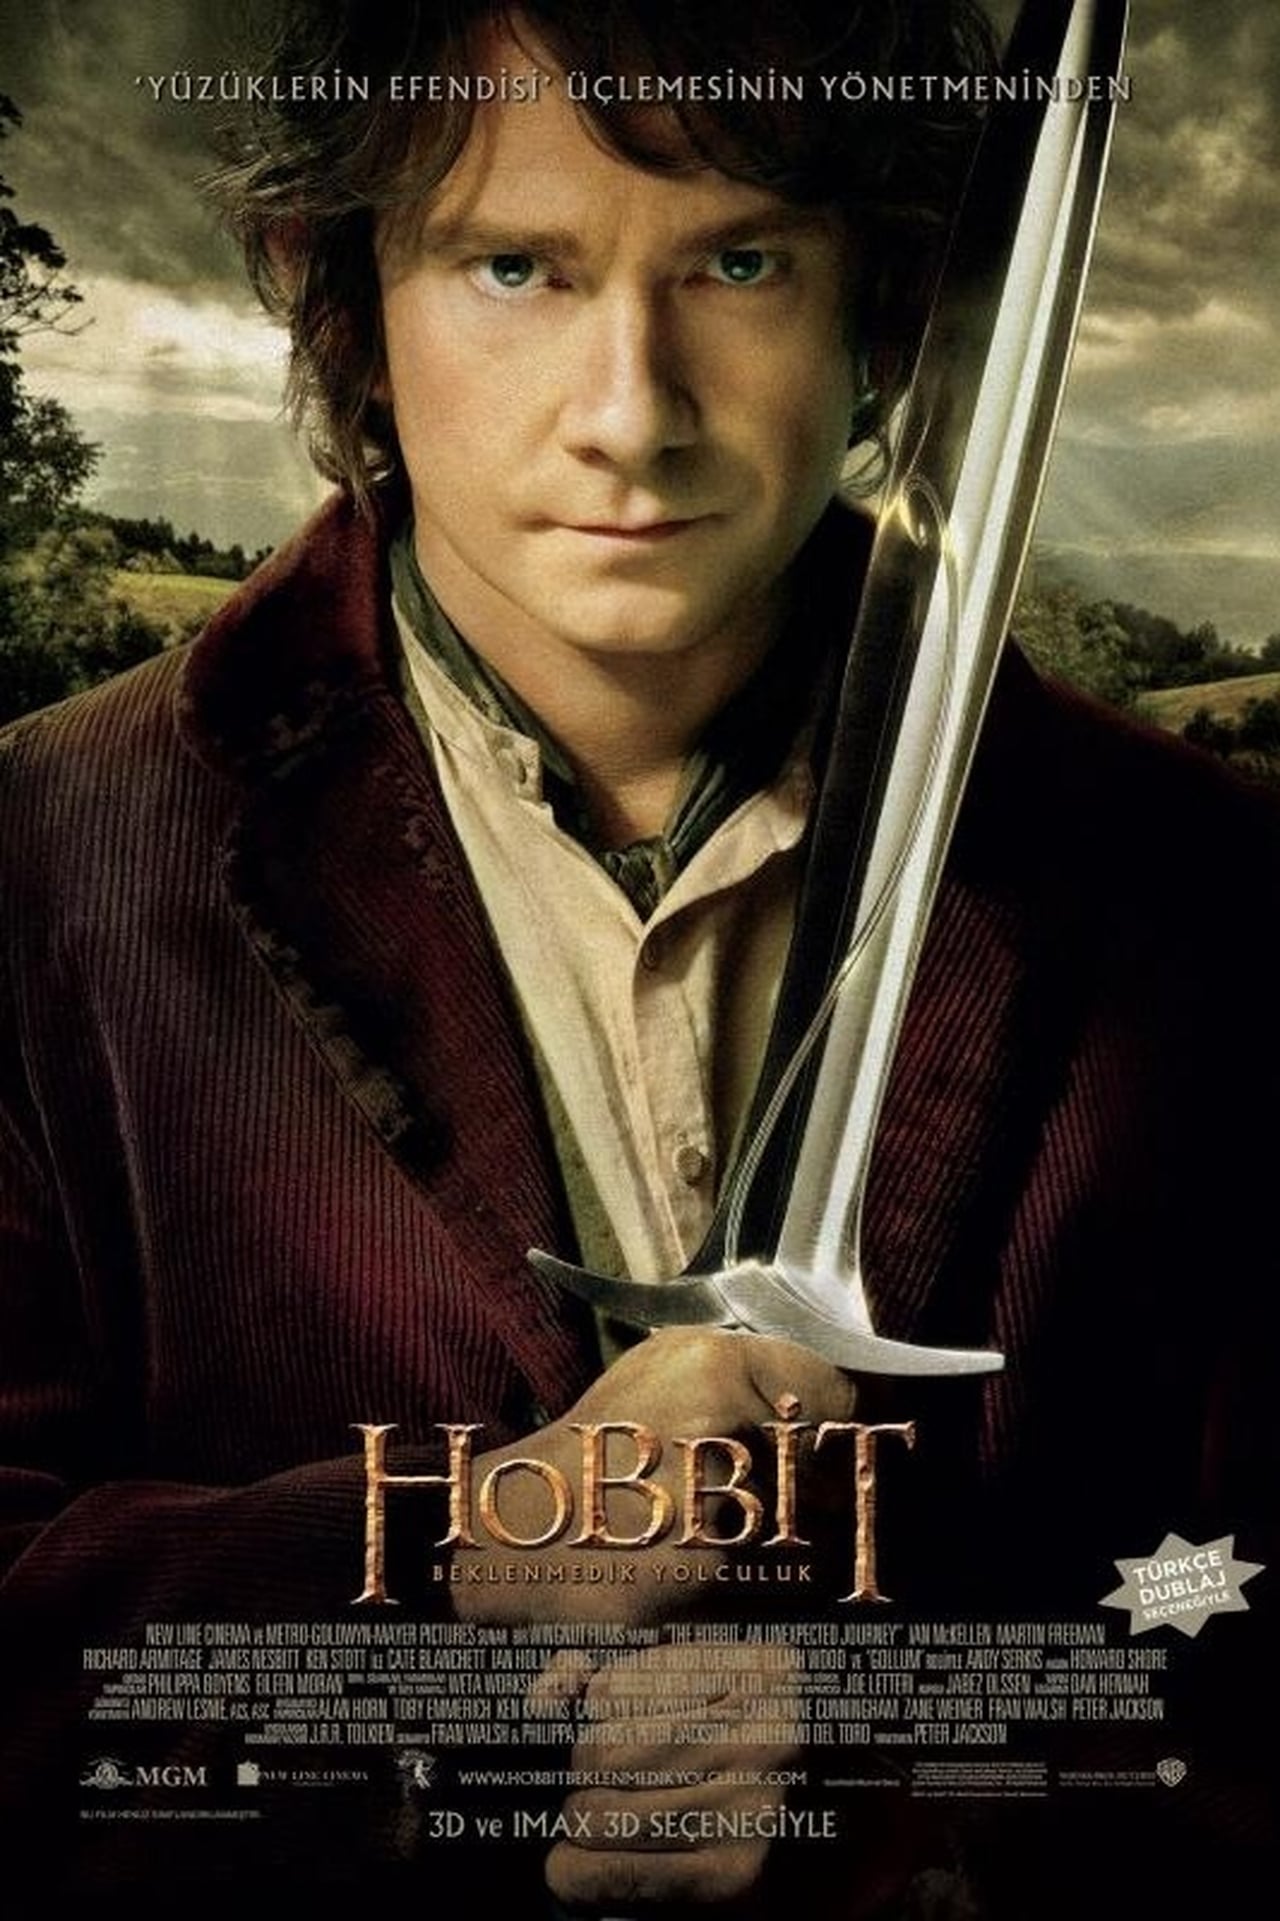 The Hobbit: An Unexpected Journey (2012) Theatrical Cut 448Kbps 23.976Fps 48Khz 5.1Ch BluRay Turkish Audio TAC